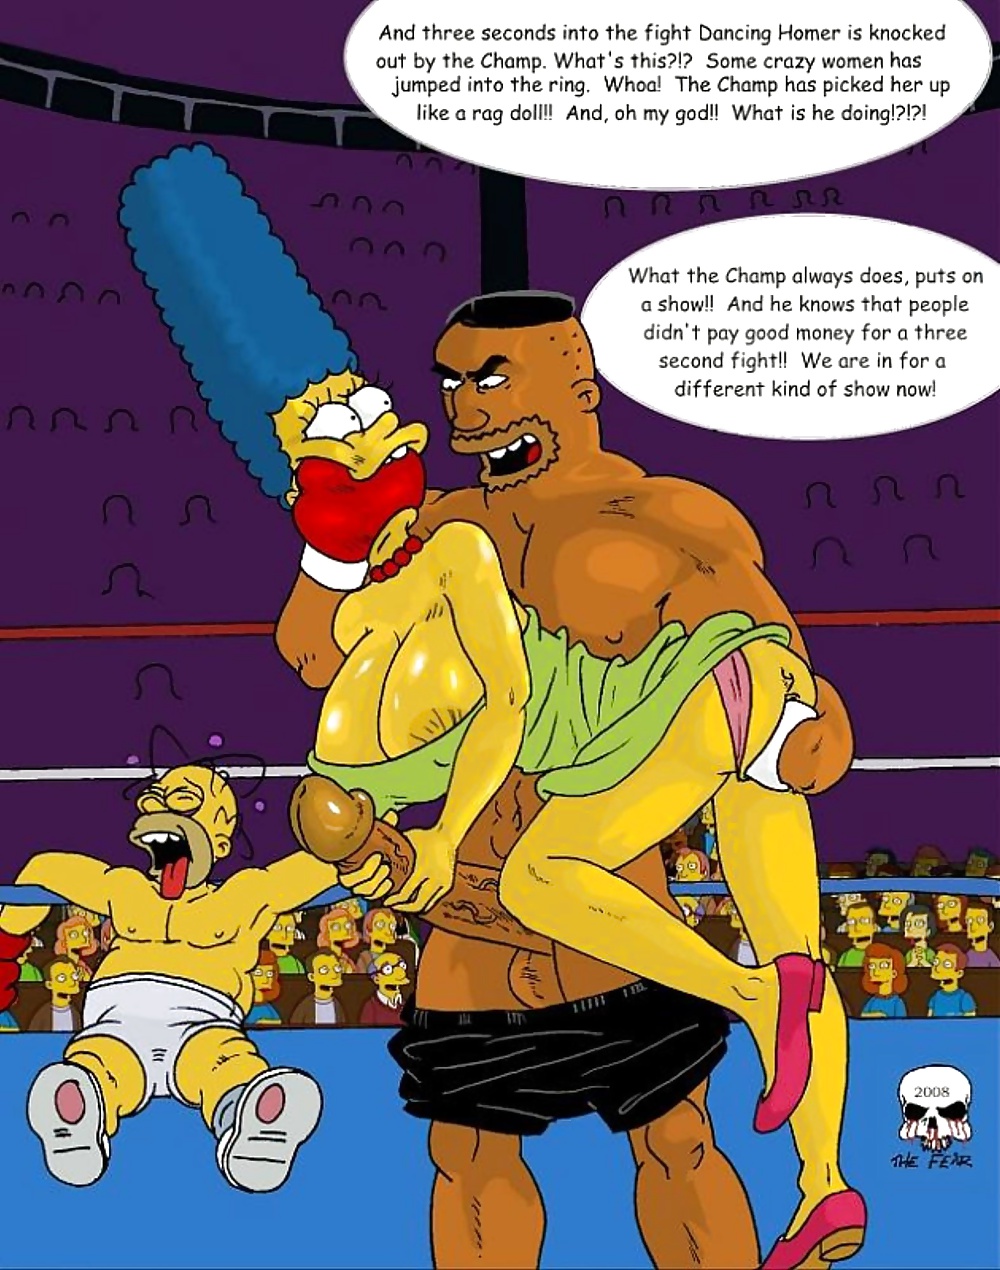 The simpsons #31711452